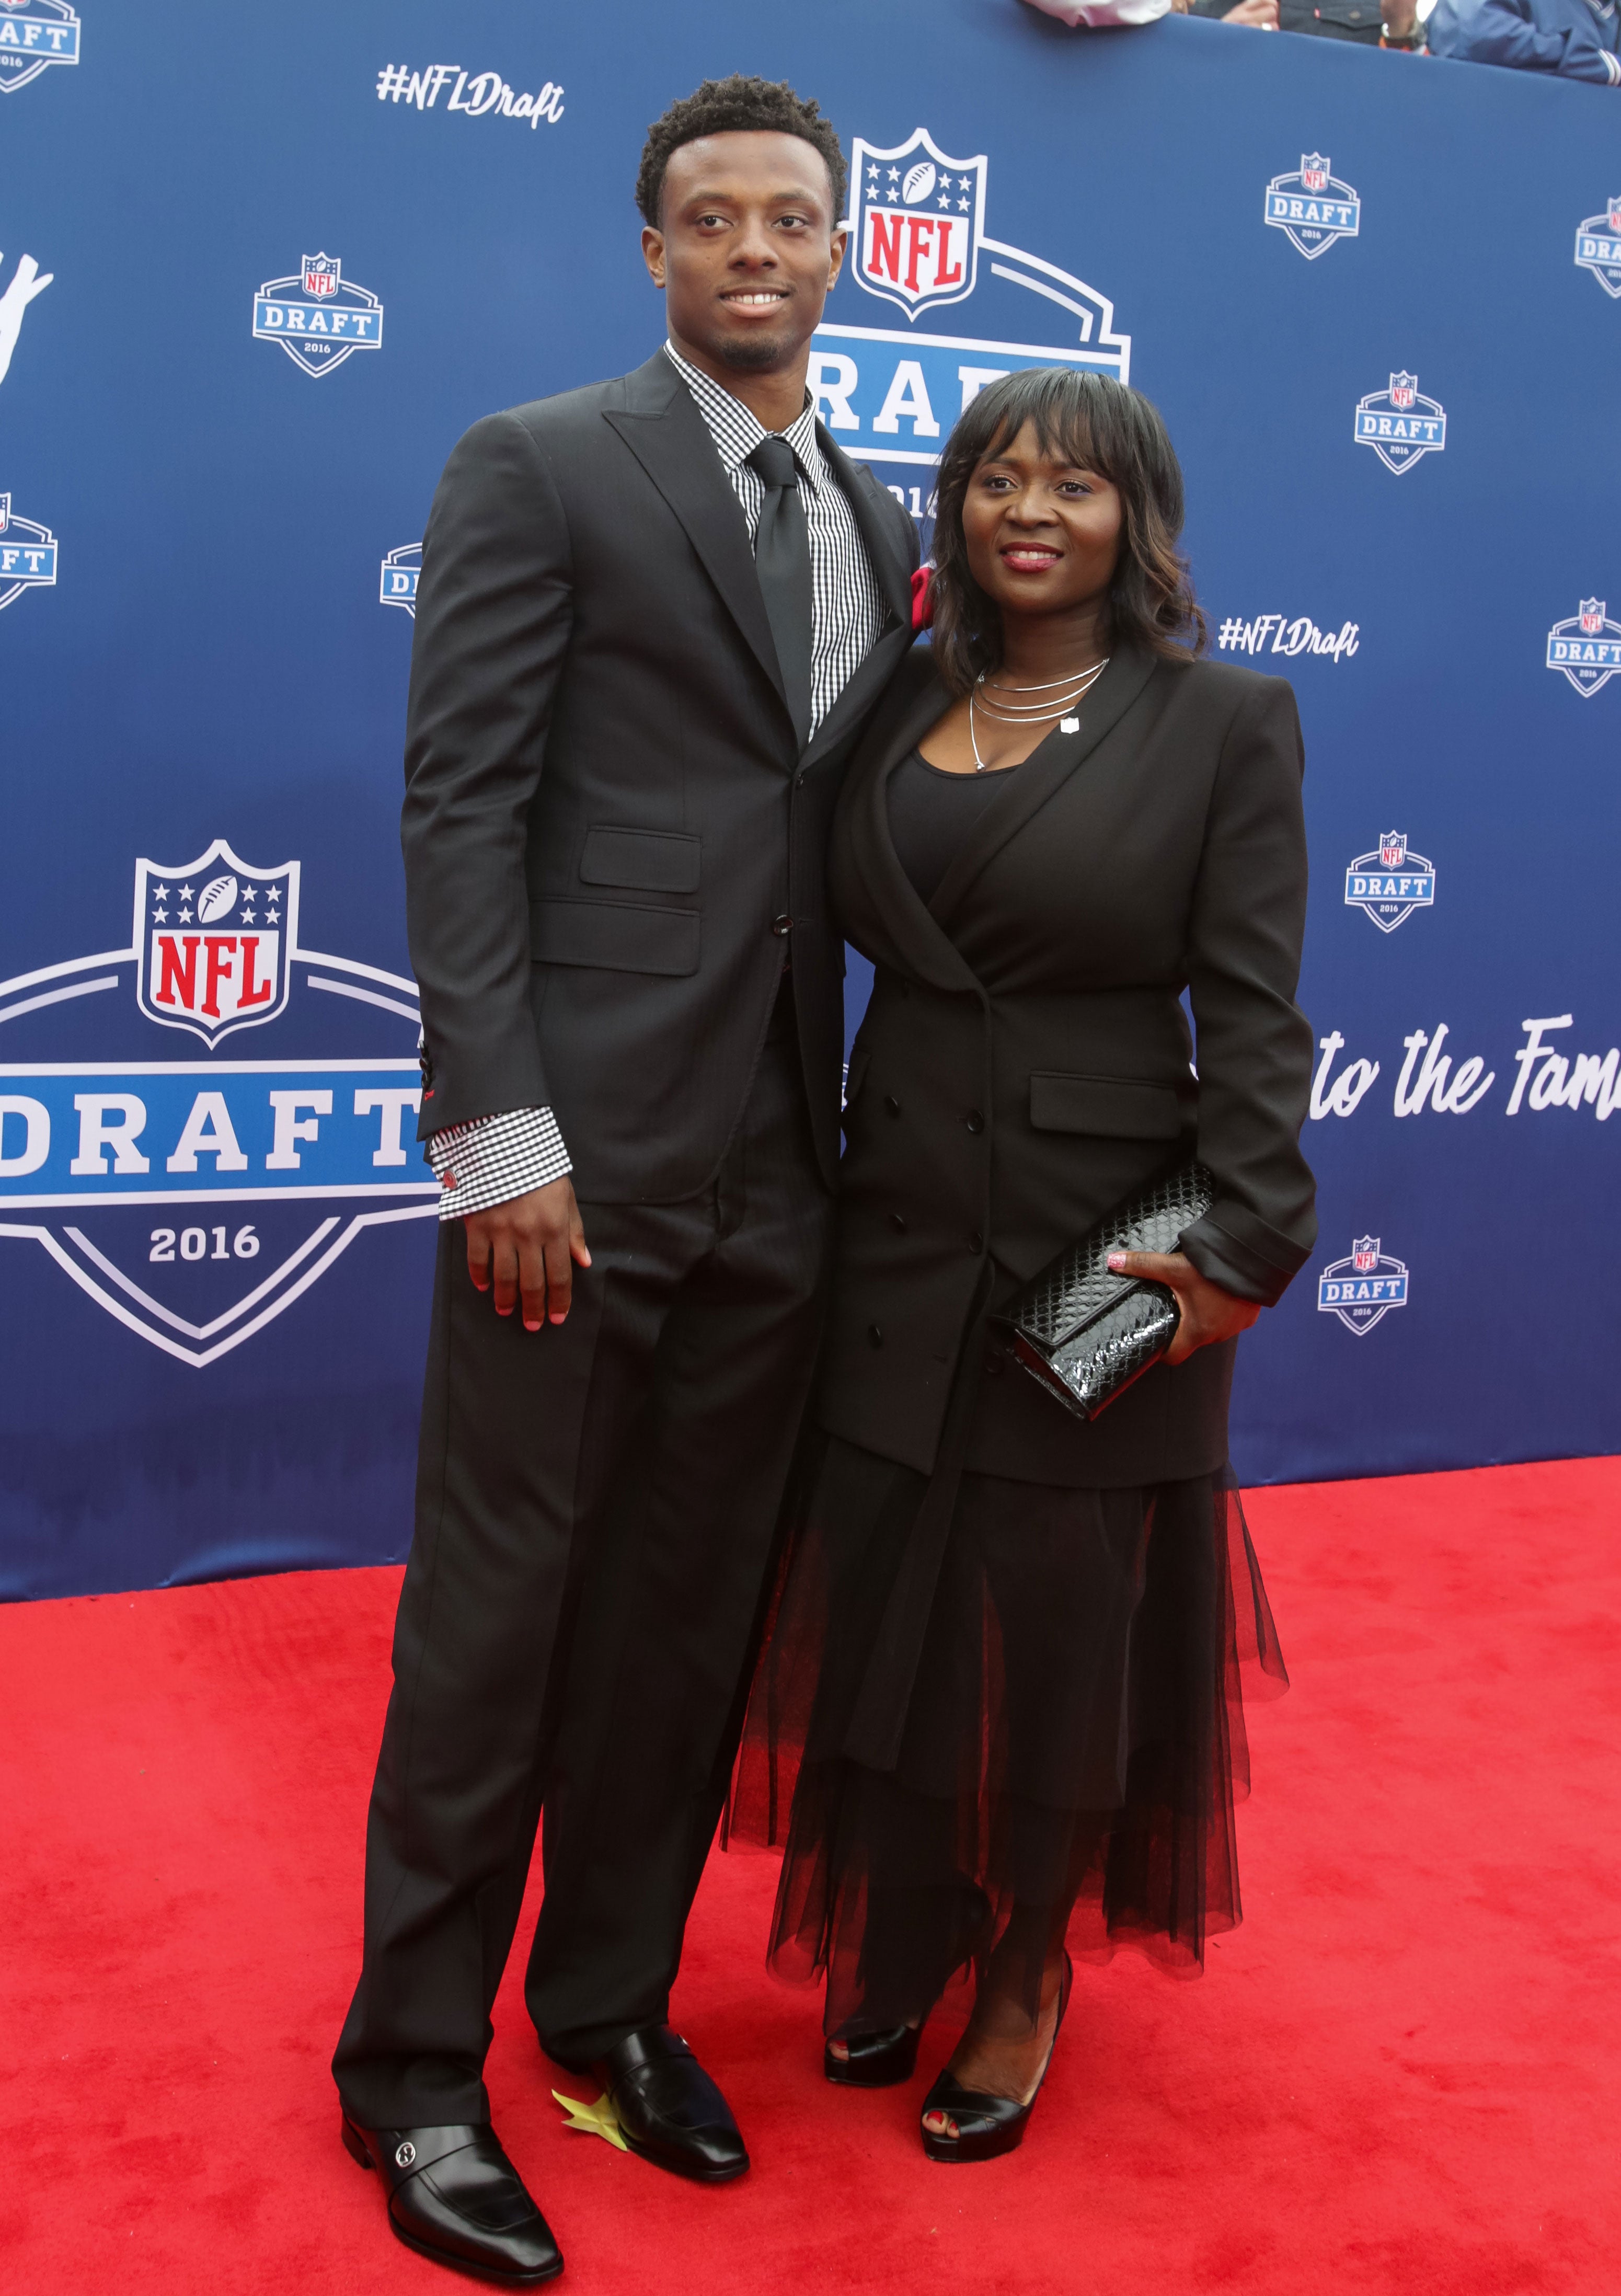 Eli Apple's Mom Knows What Goes Down In The DM
